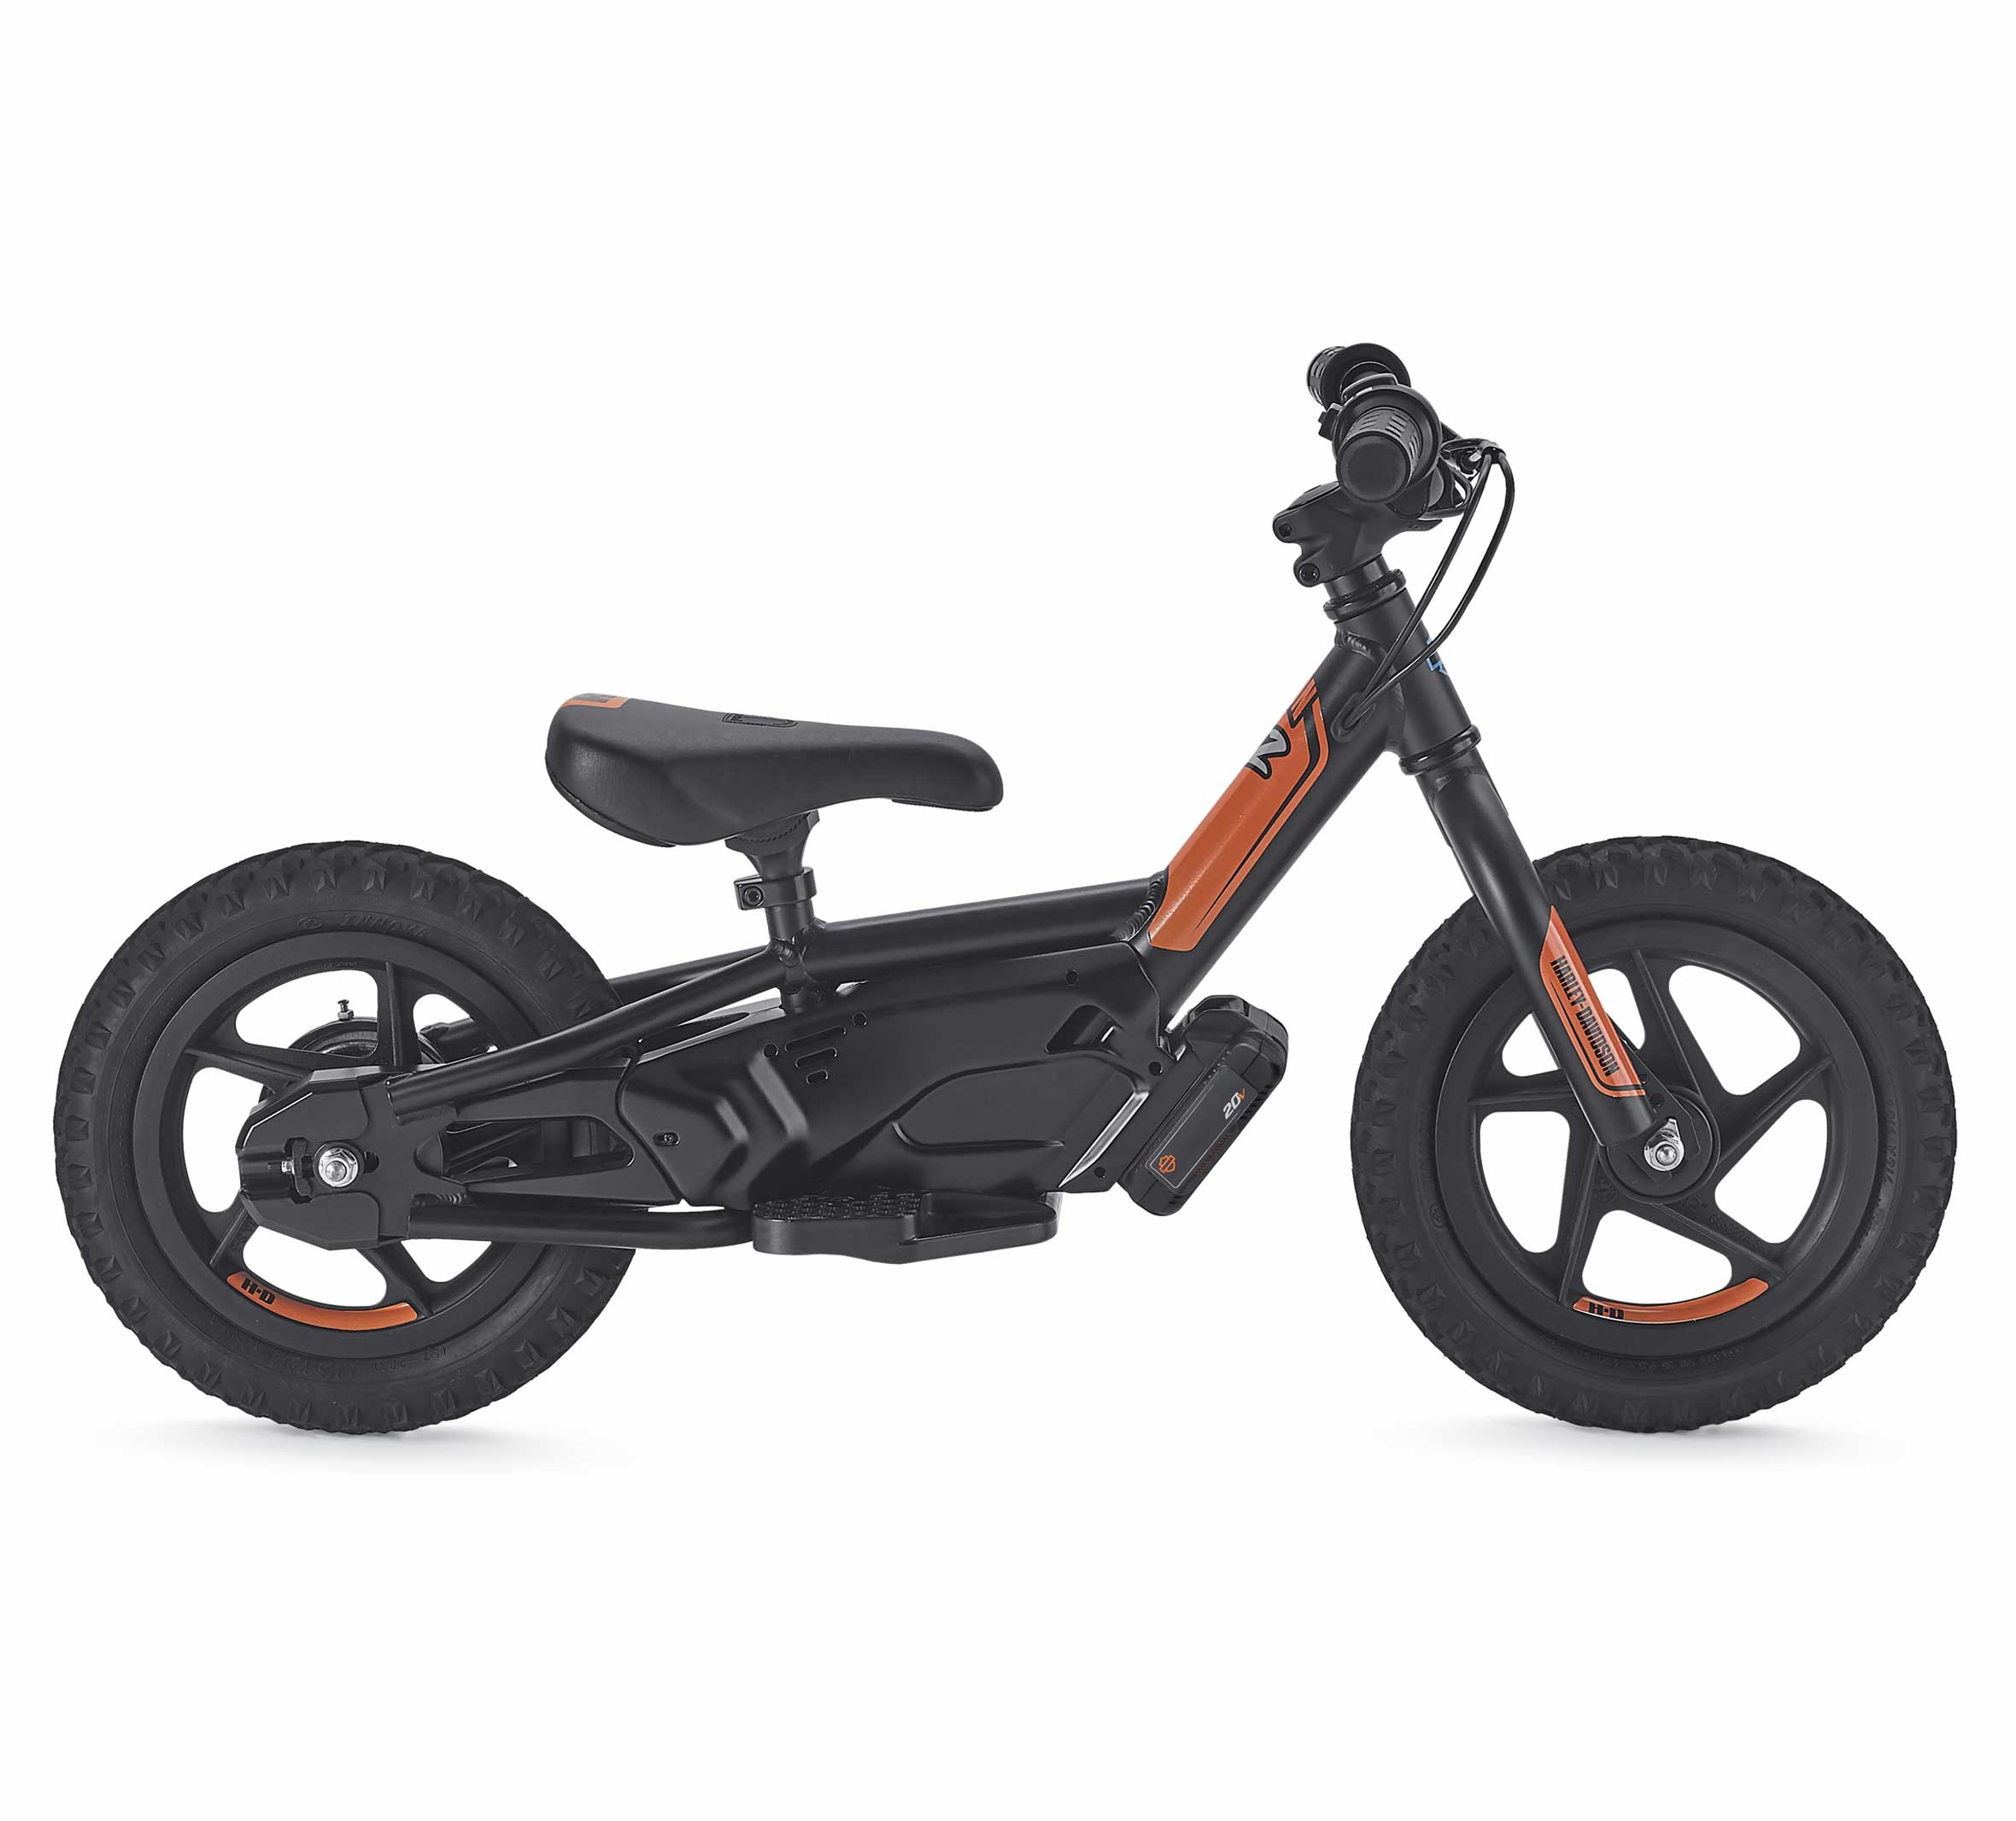 Kids Ride On Motorbike 12V Electric Motorcycle Children Tricycle Harley Style UK 